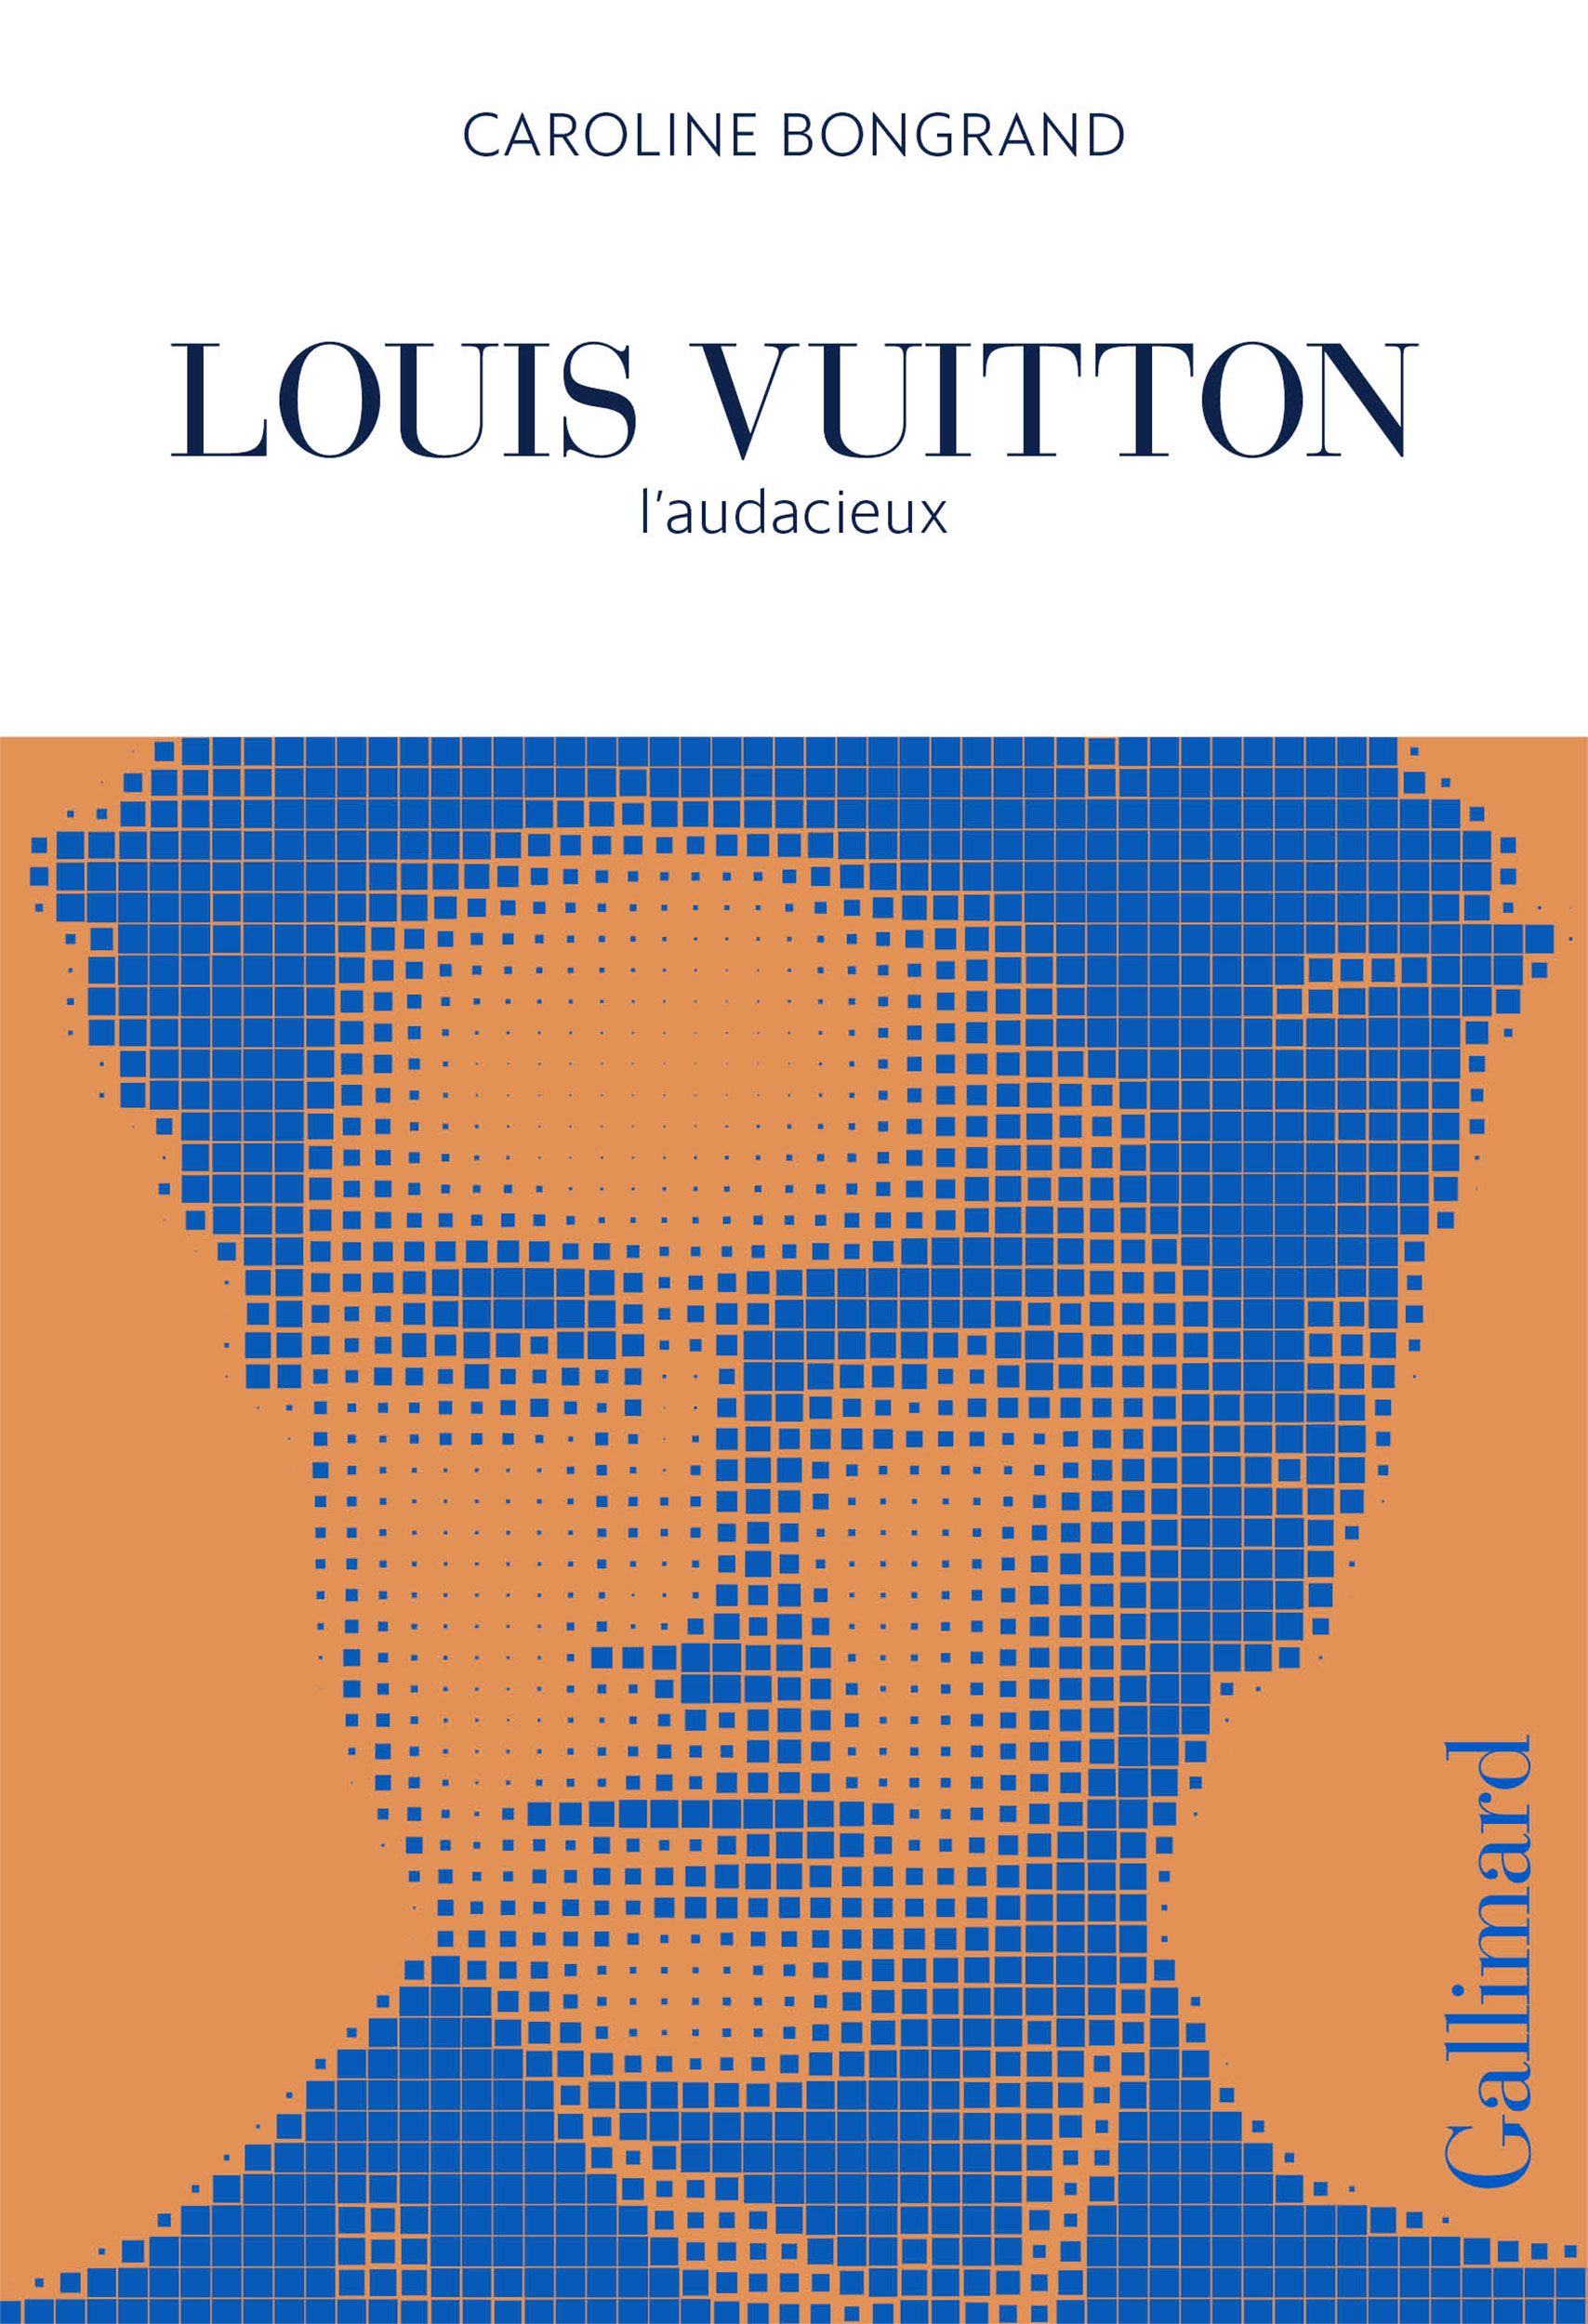 Louis Vuitton Is Celebrating Its Founder's 200th Birthday in a Big Way – WWD